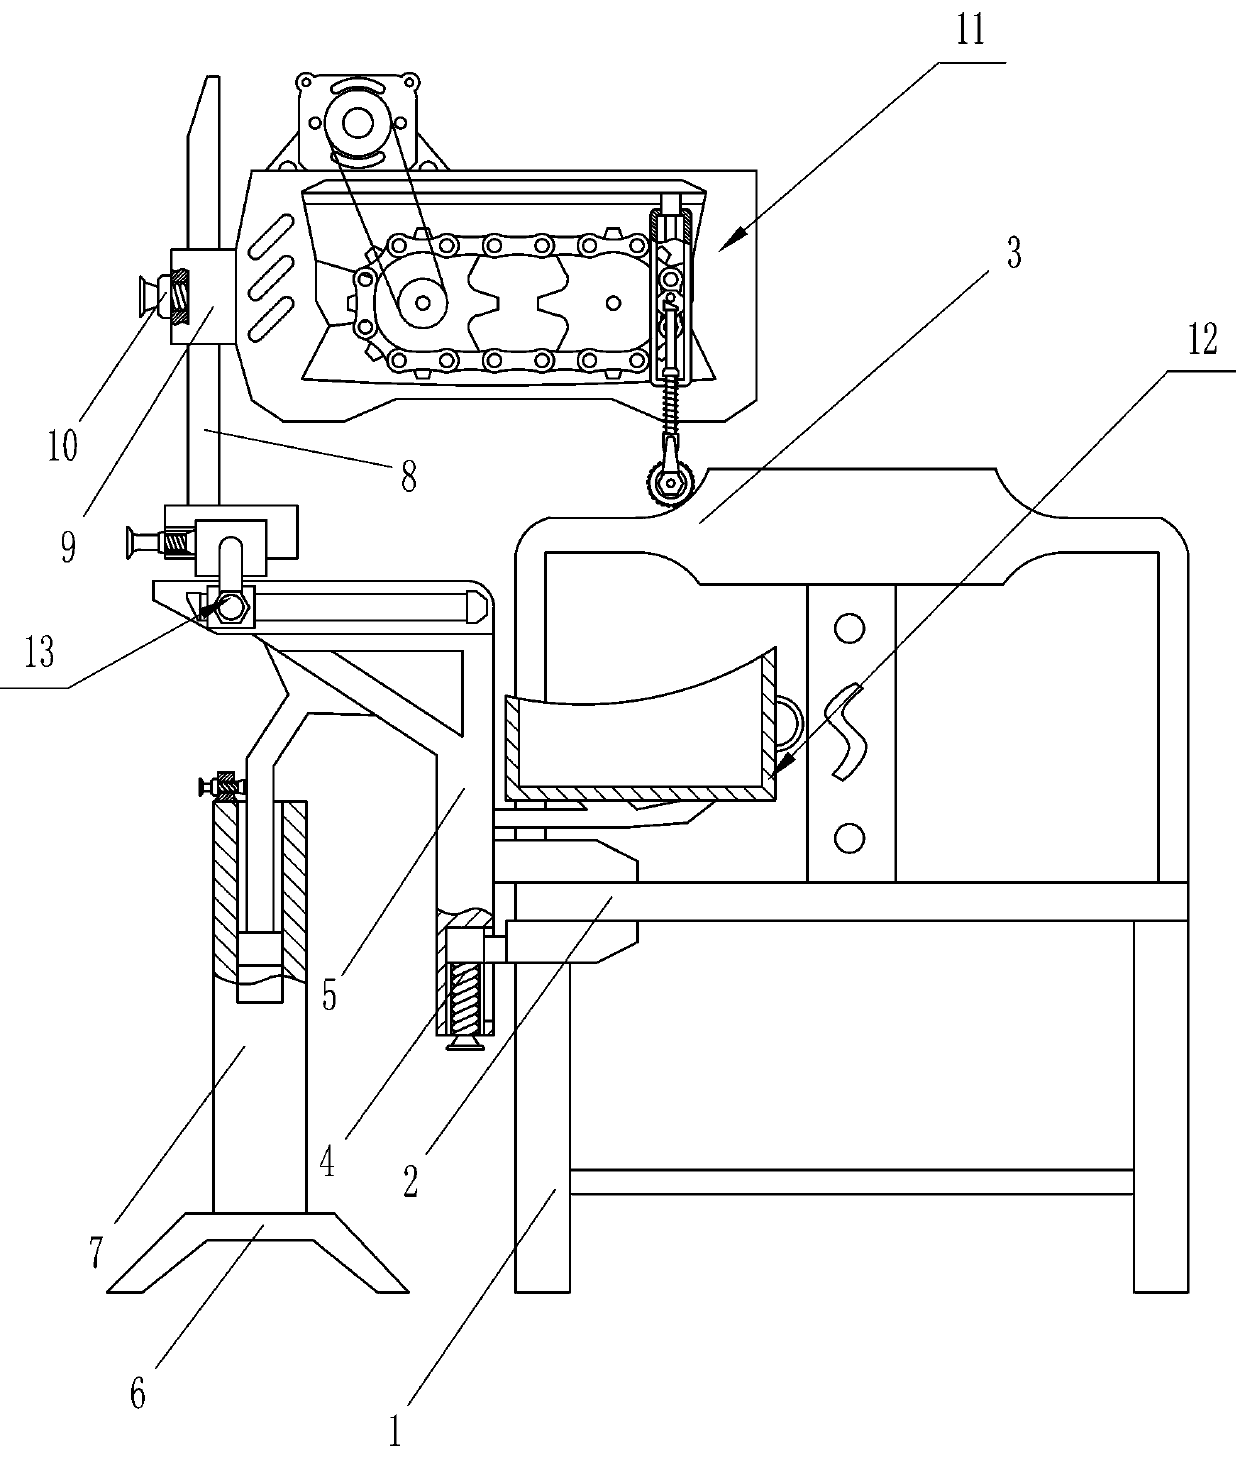 Automatic grinding machine for arc-shaped corner of chair backrest